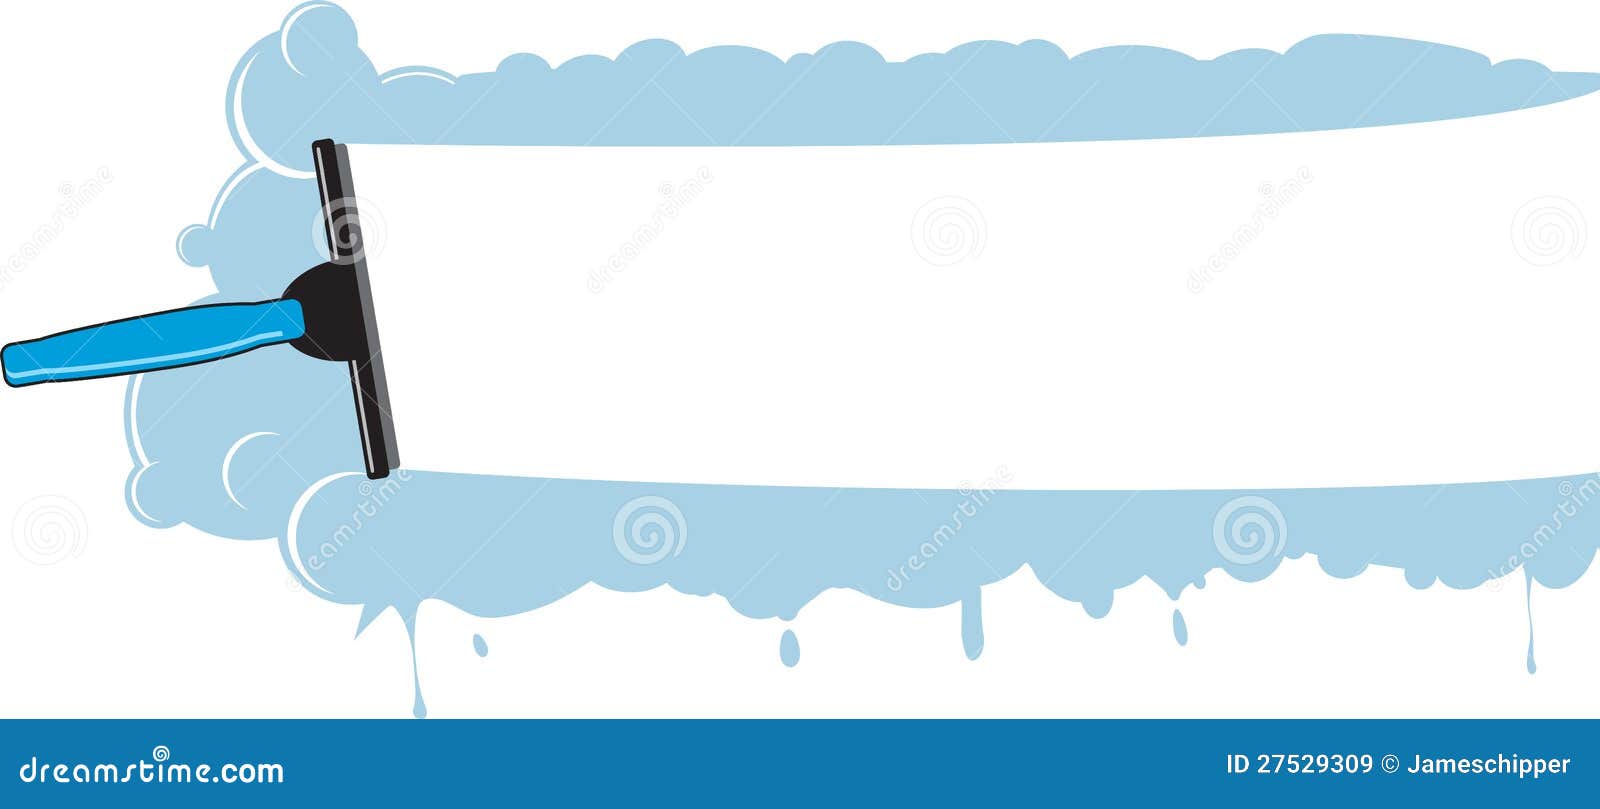 free clipart window cleaner - photo #30